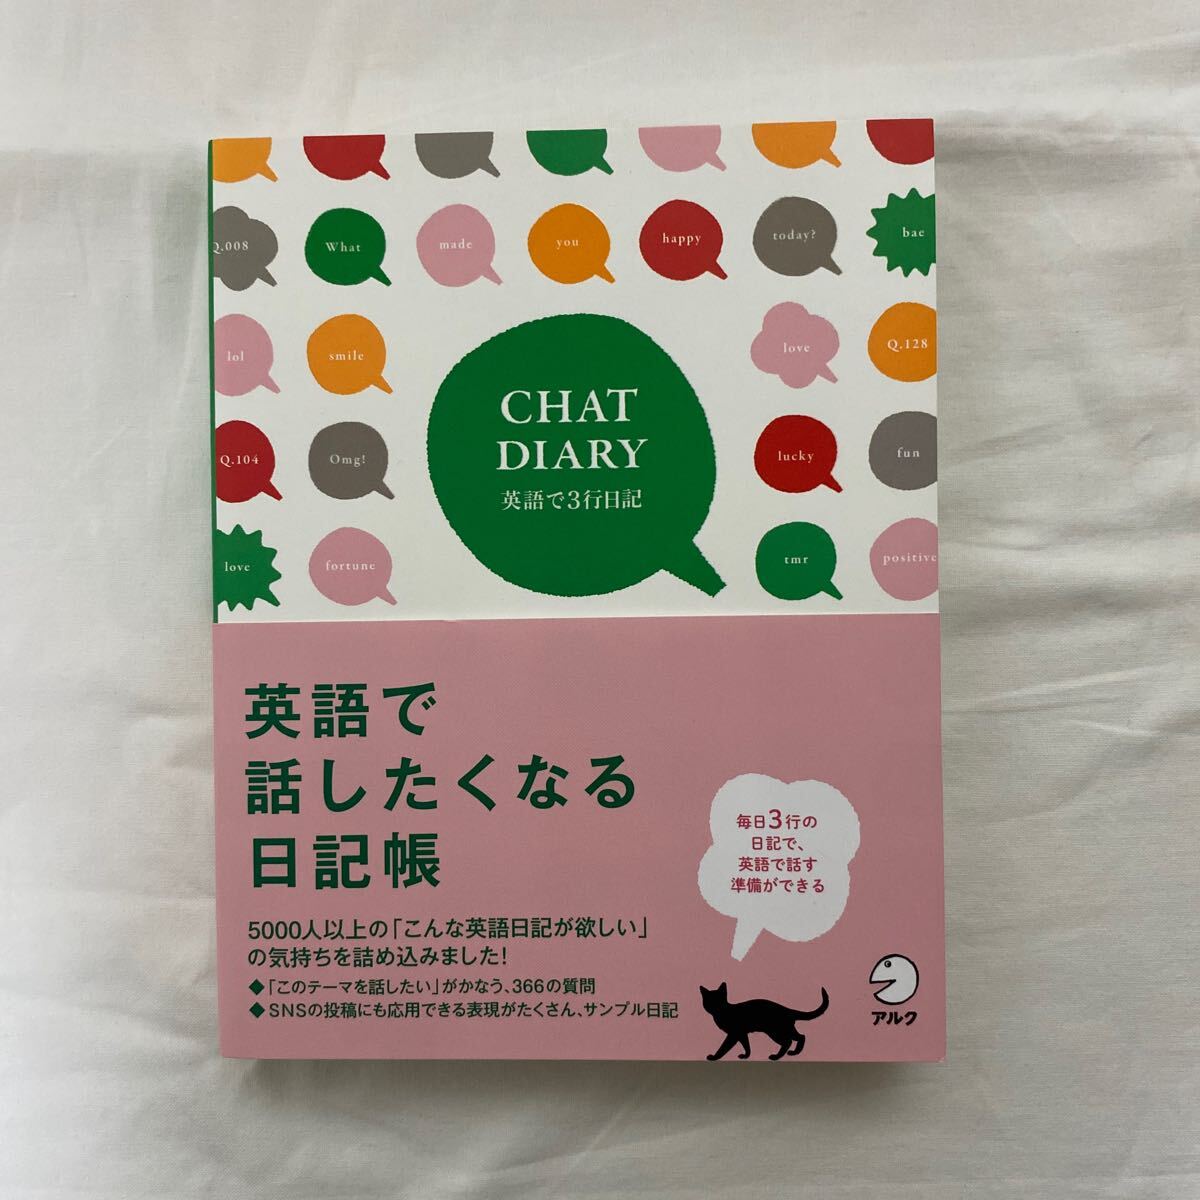 CHAT DIARY 英語で3行日記　古本　帯付き　アルク　英語で話したくなる日記帳_画像1